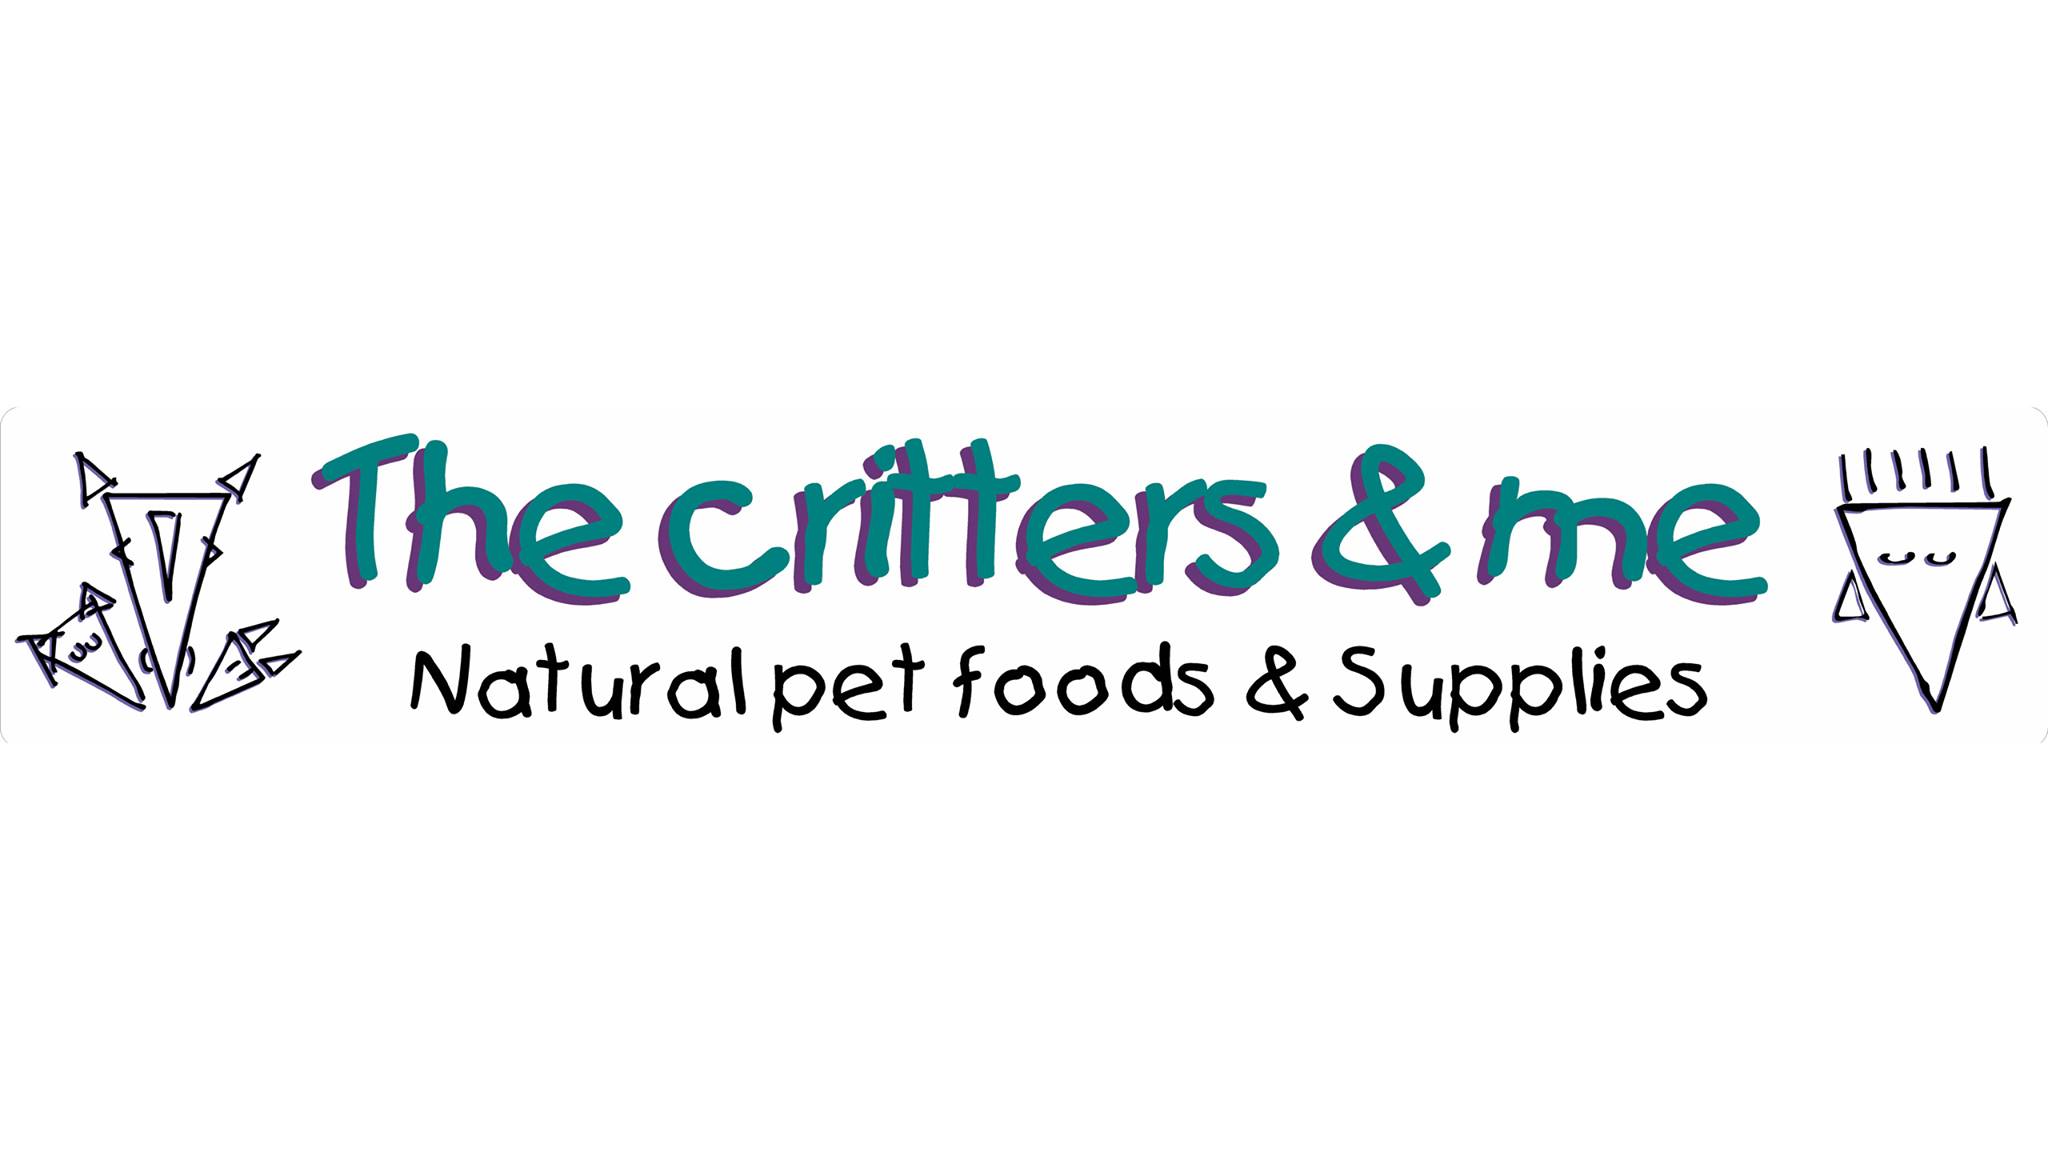 Company logo of The Critters & Me